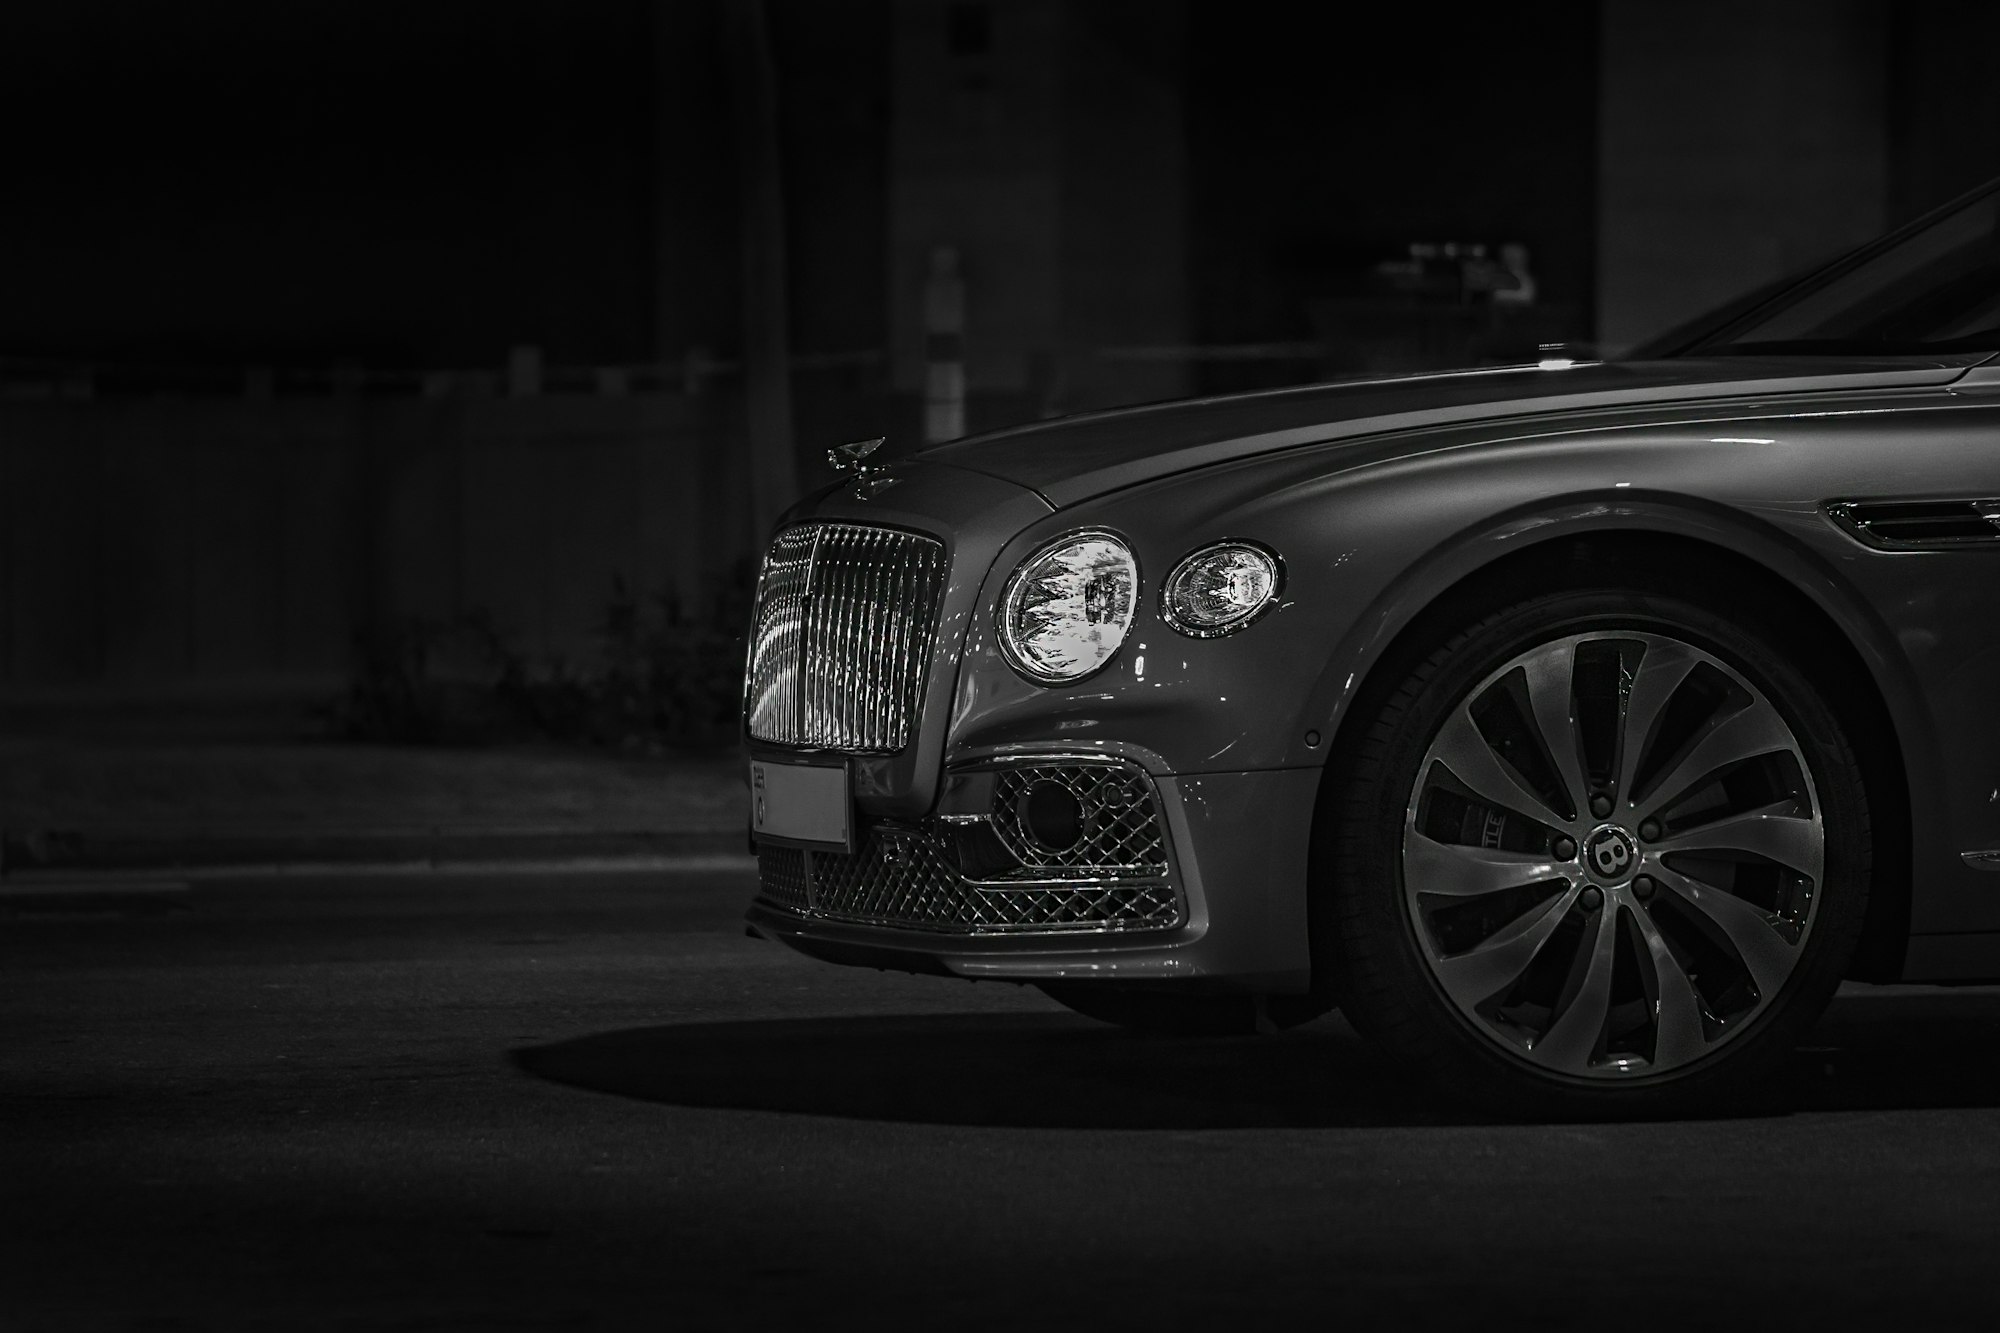 A grey Bentley out at night with only the front part shown